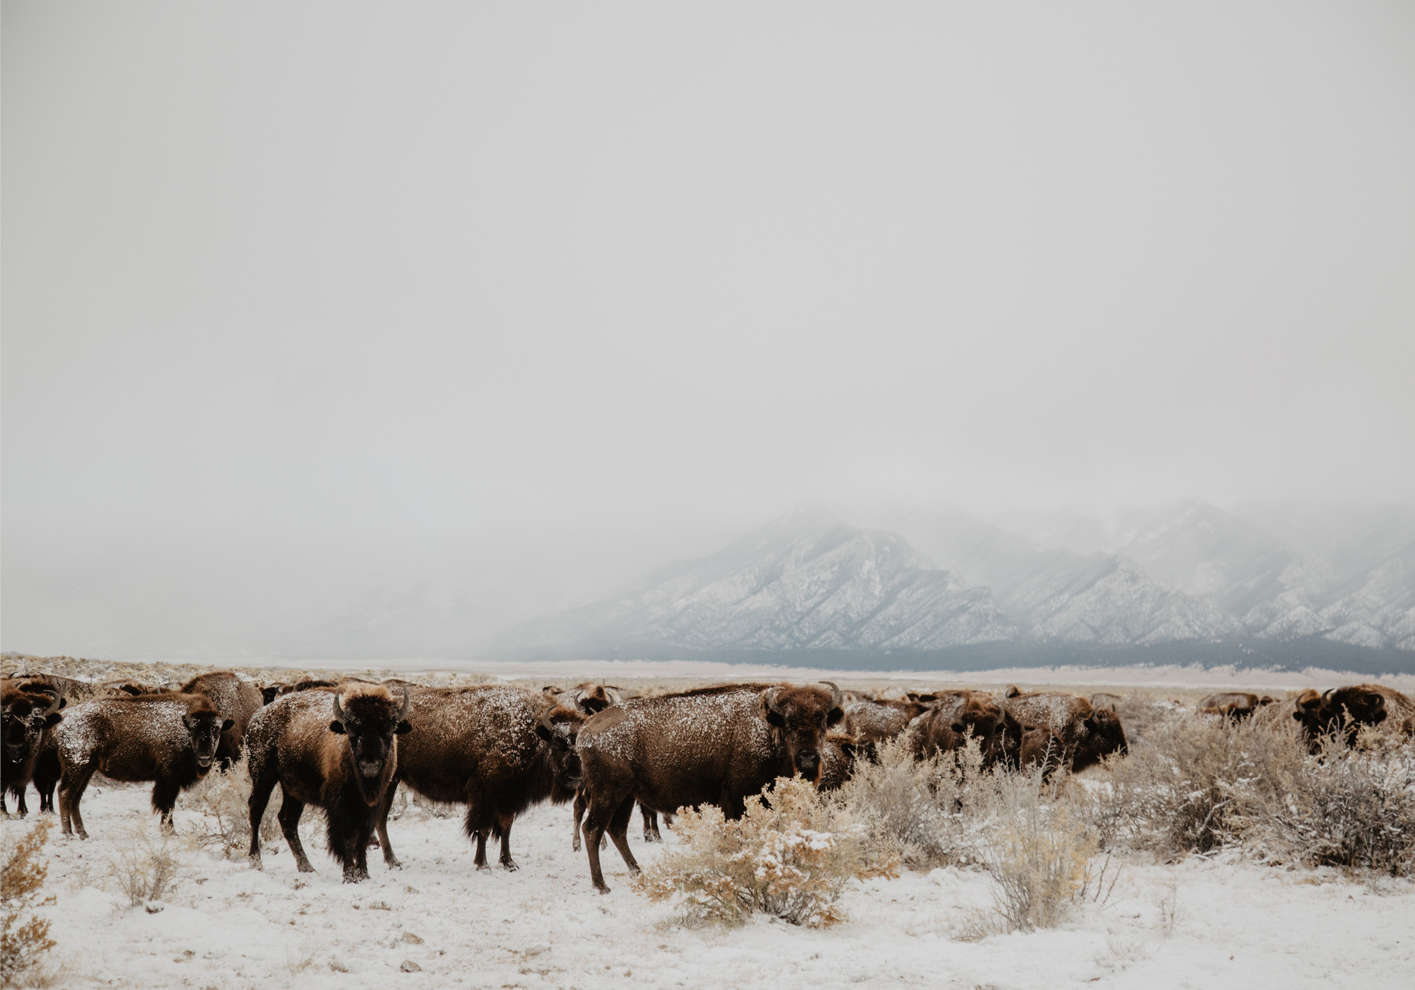 A herd of North American plains bison